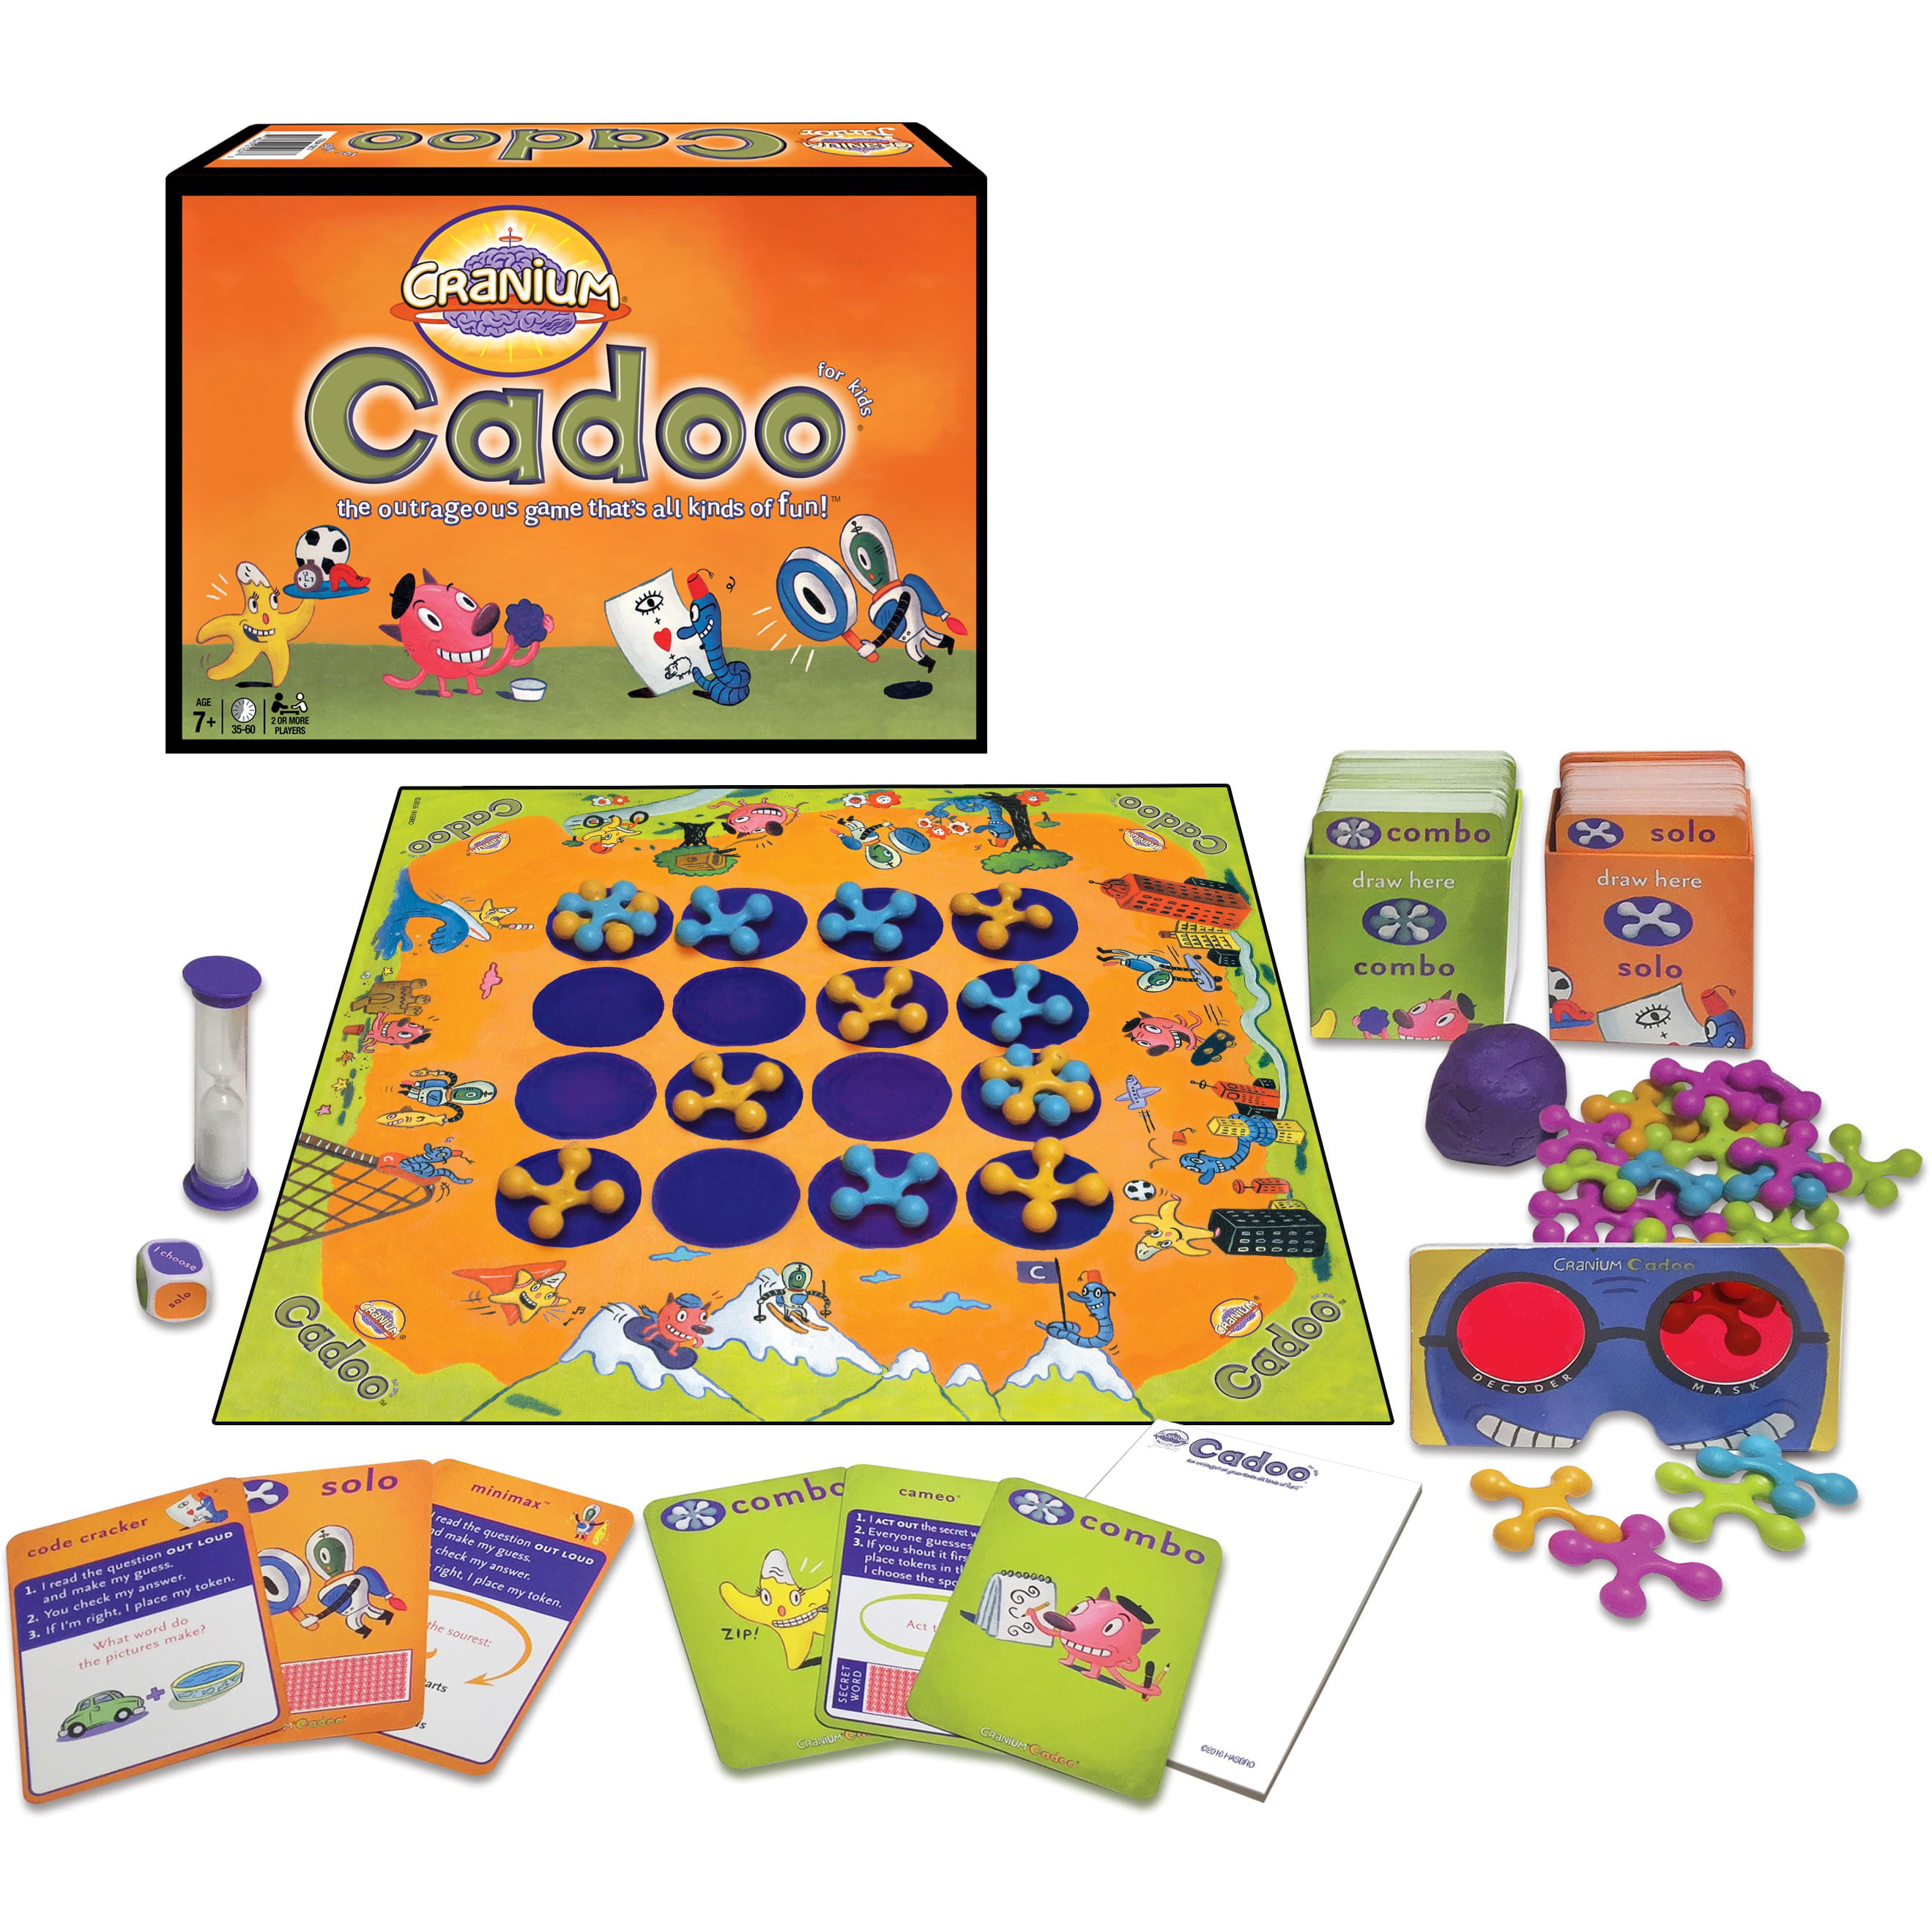 Cranium Cadoo Replacement Parts You choose from Drop Down Box 